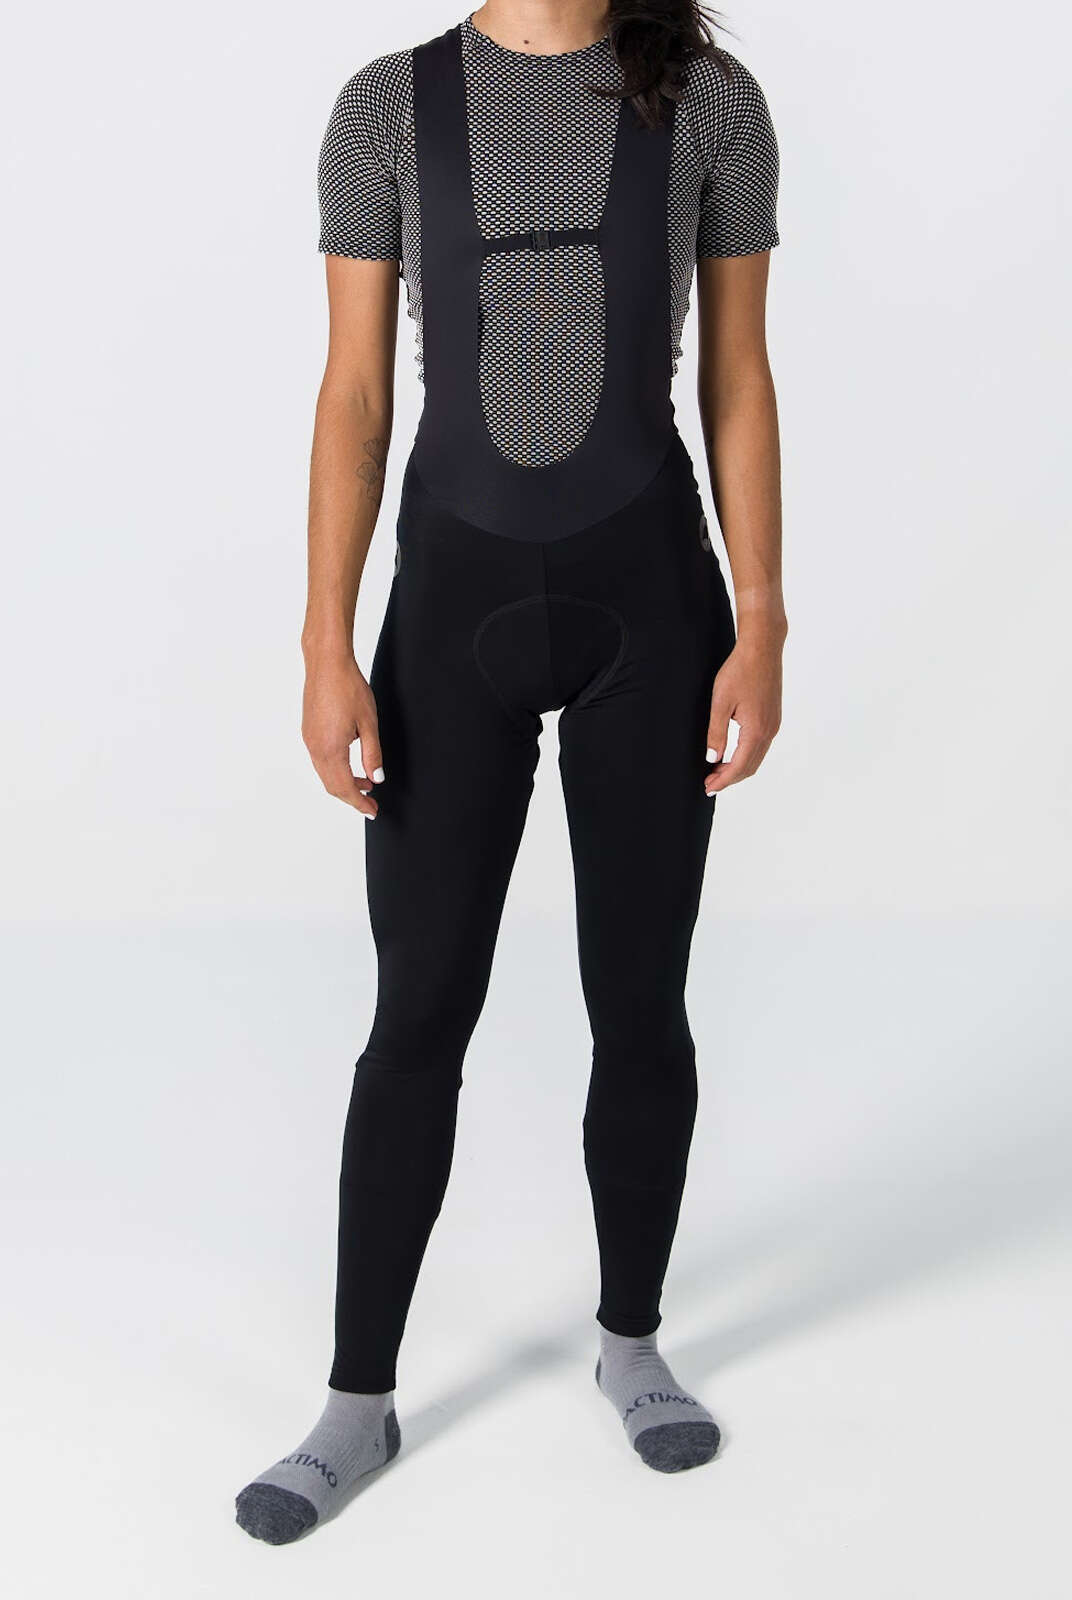 Women's Water-Repelling Thermal Cycling Bib Tights - Front View